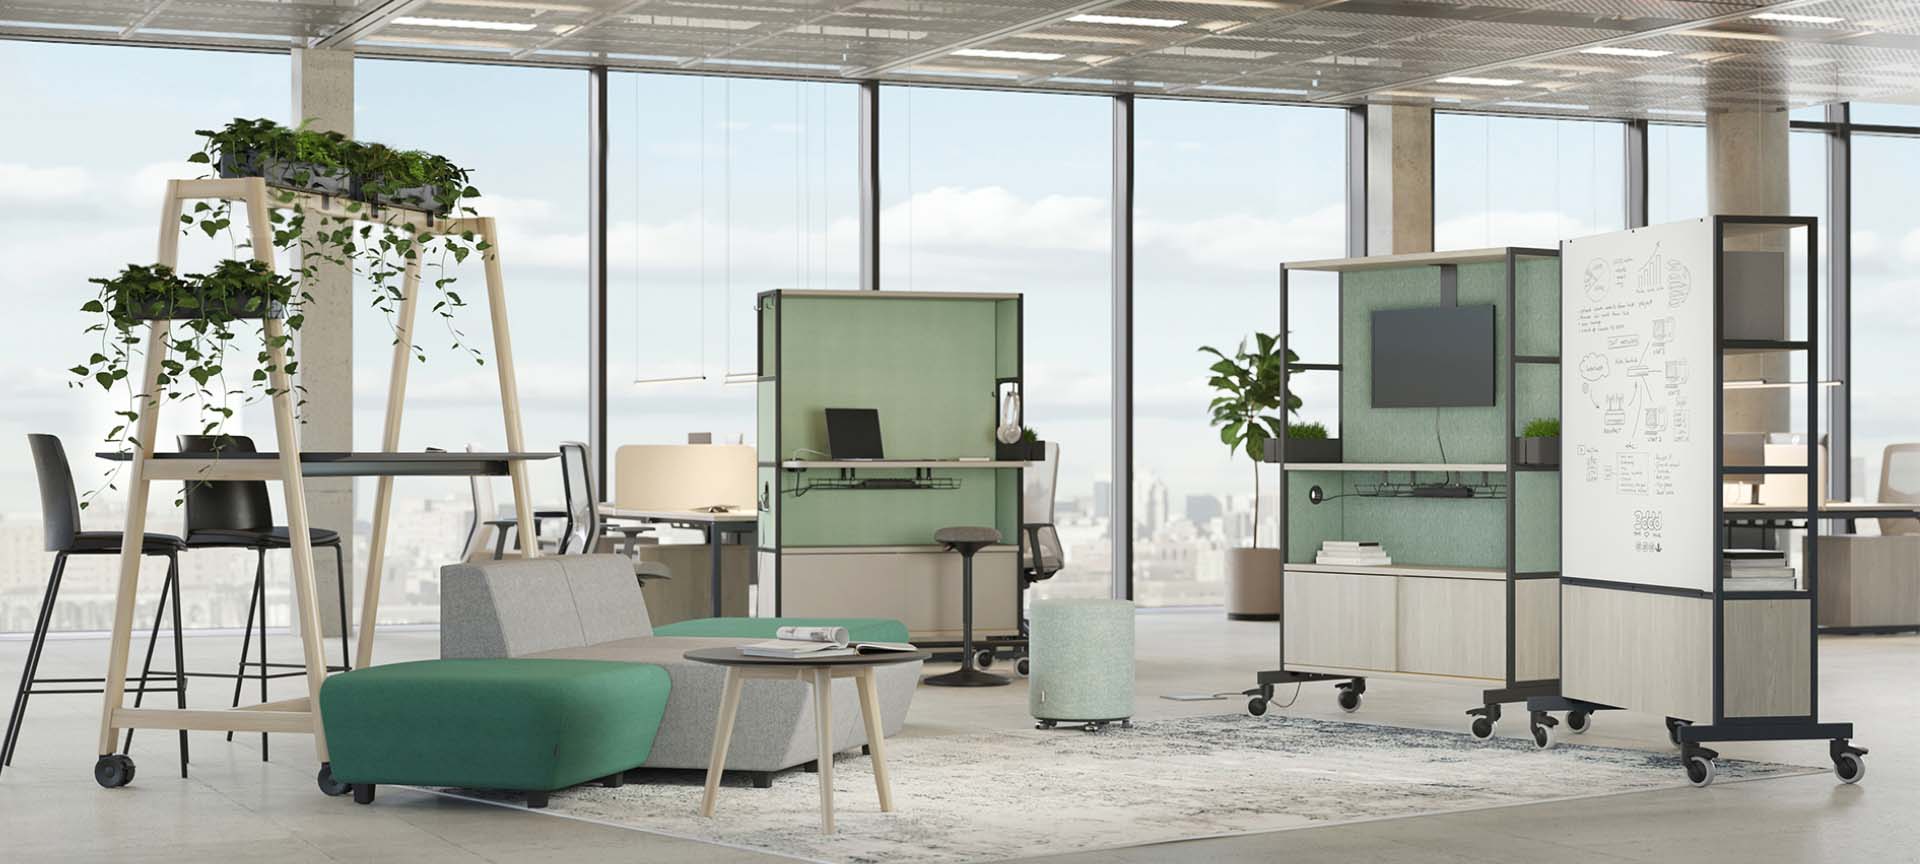 Smart Office Kibemo to support Smart Working Styles